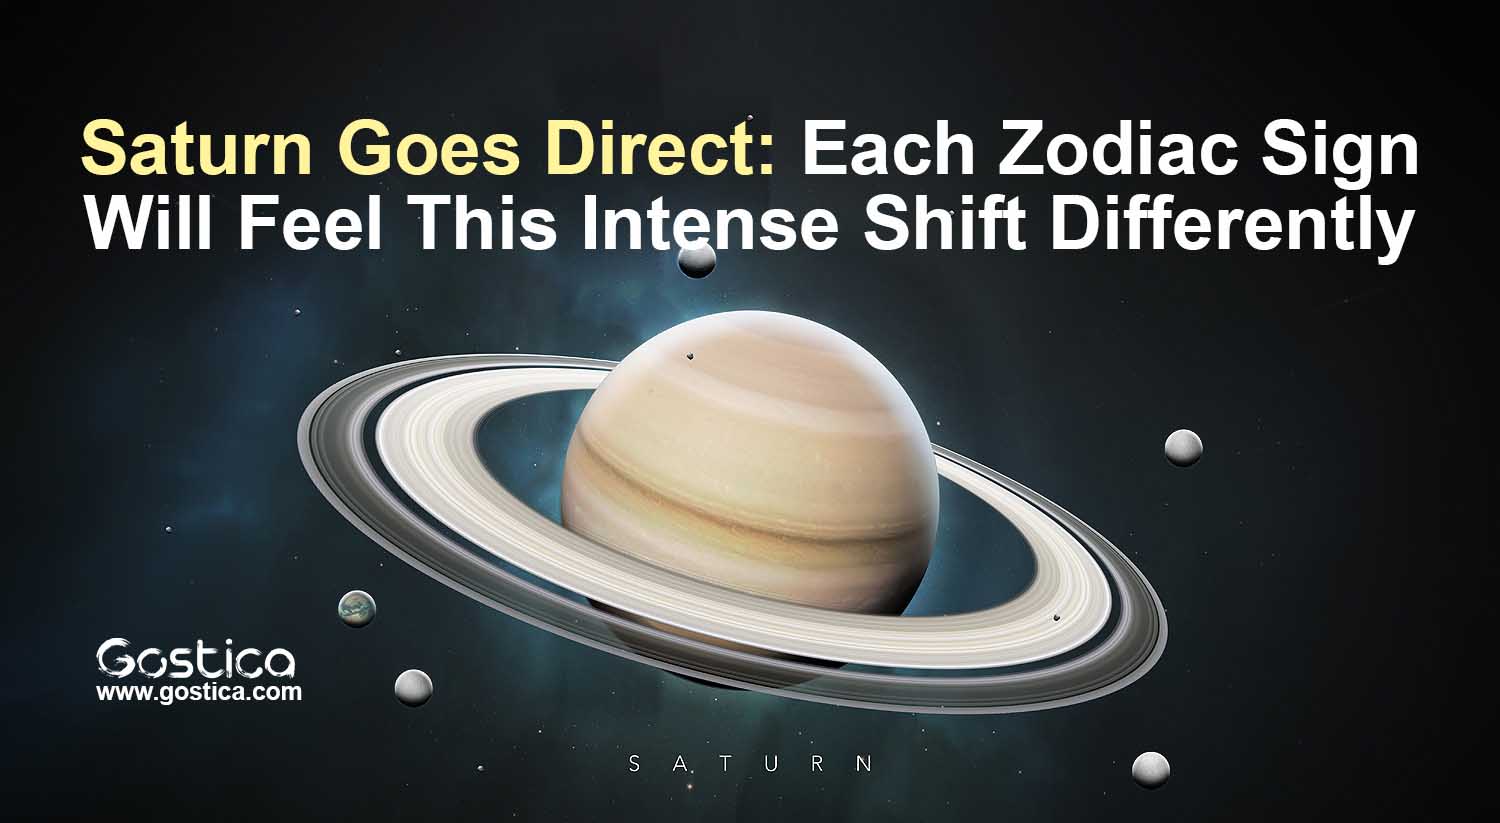 Saturn-Goes-Direct-Each-Zodiac-Sign-Will-Feel-This-Intense-Shift-Differently.jpg